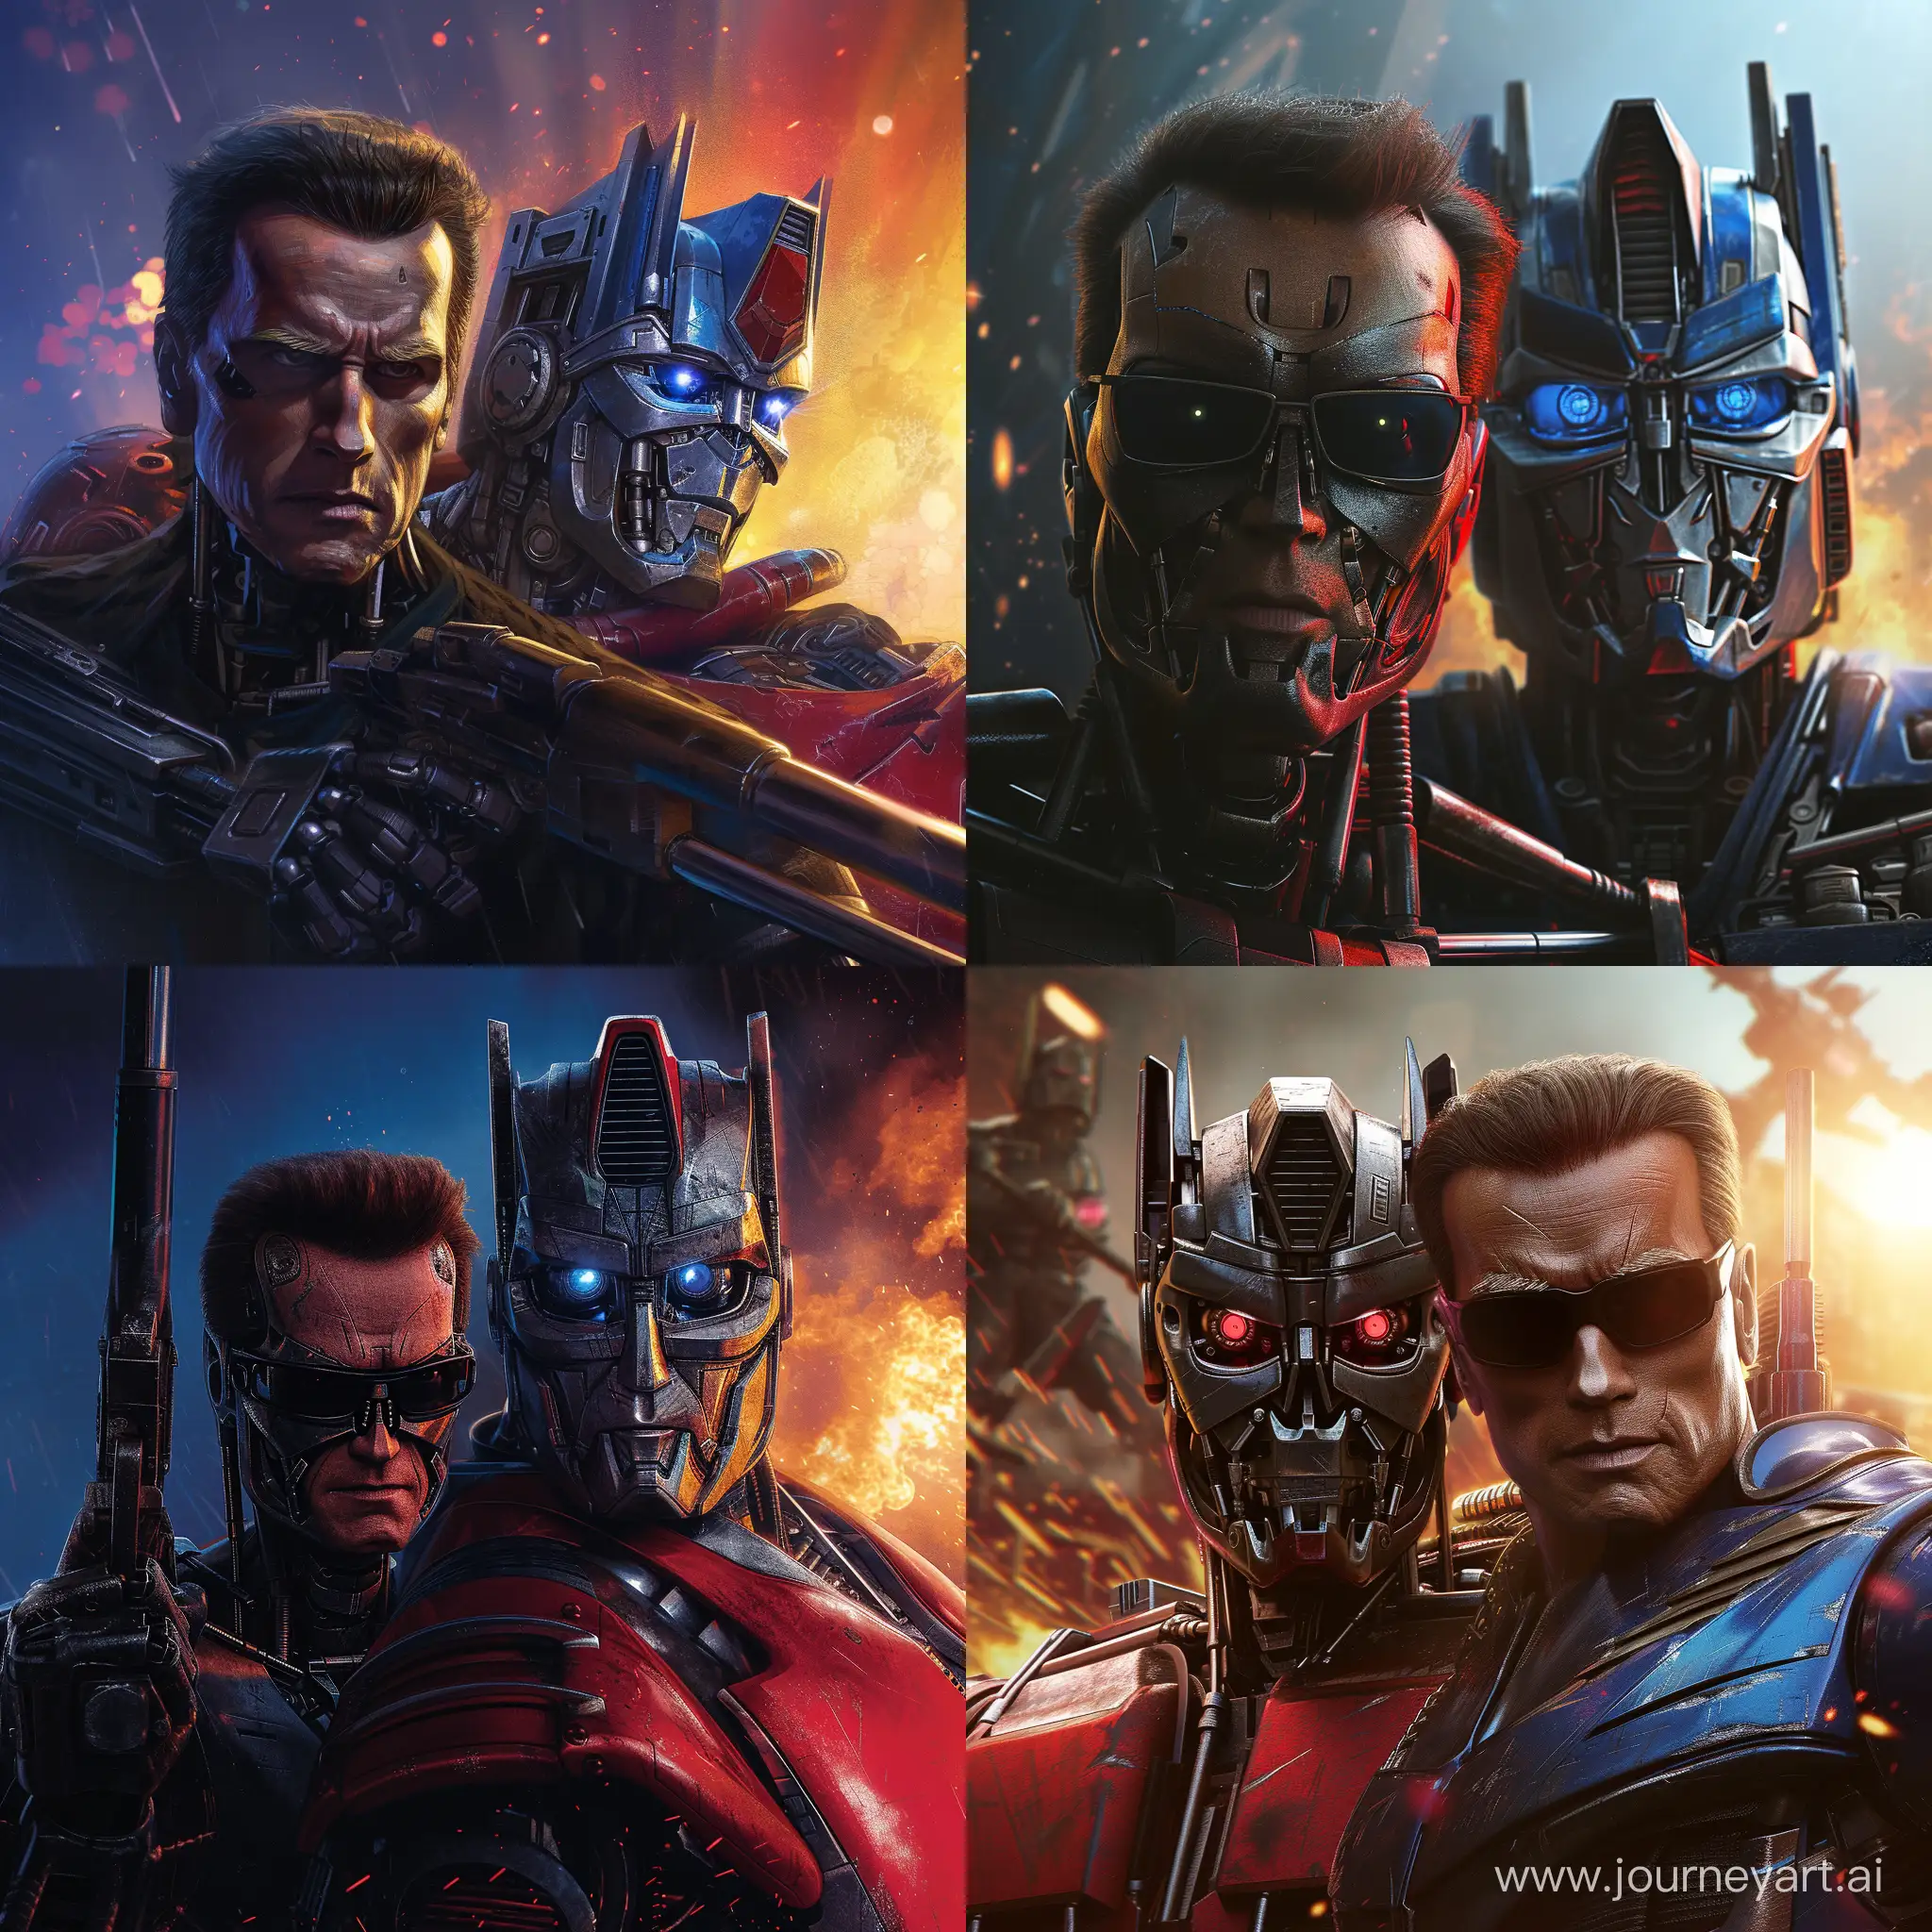 Epic-Battle-Between-Terminator-and-Optimus-Prime-in-4K-High-Resolution